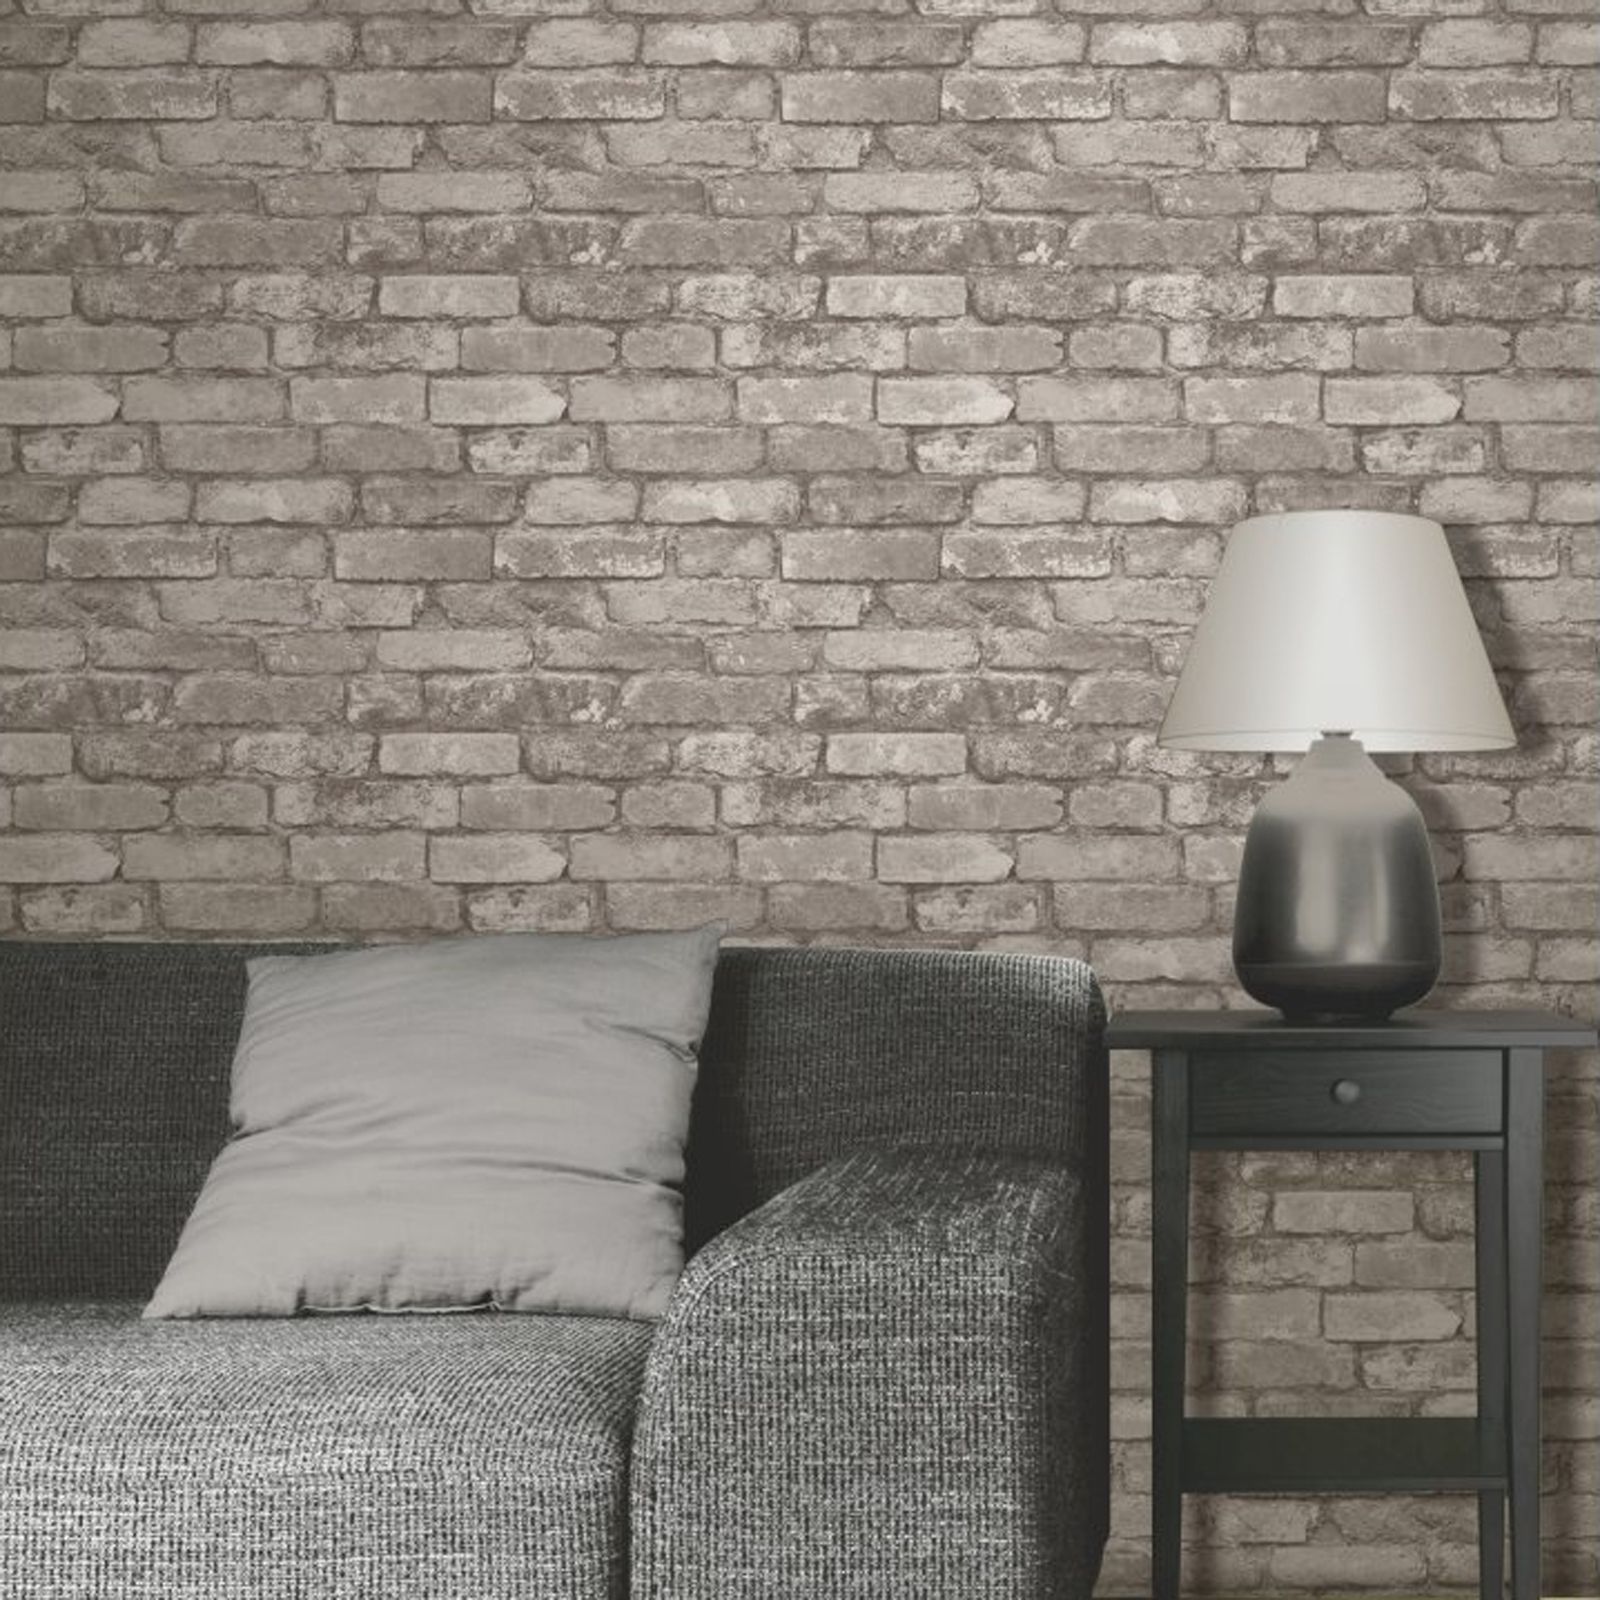 Details about RUSTIC BRICK EFFECT WALLPAPER 10m SILVER GREY NEW 1600x1600